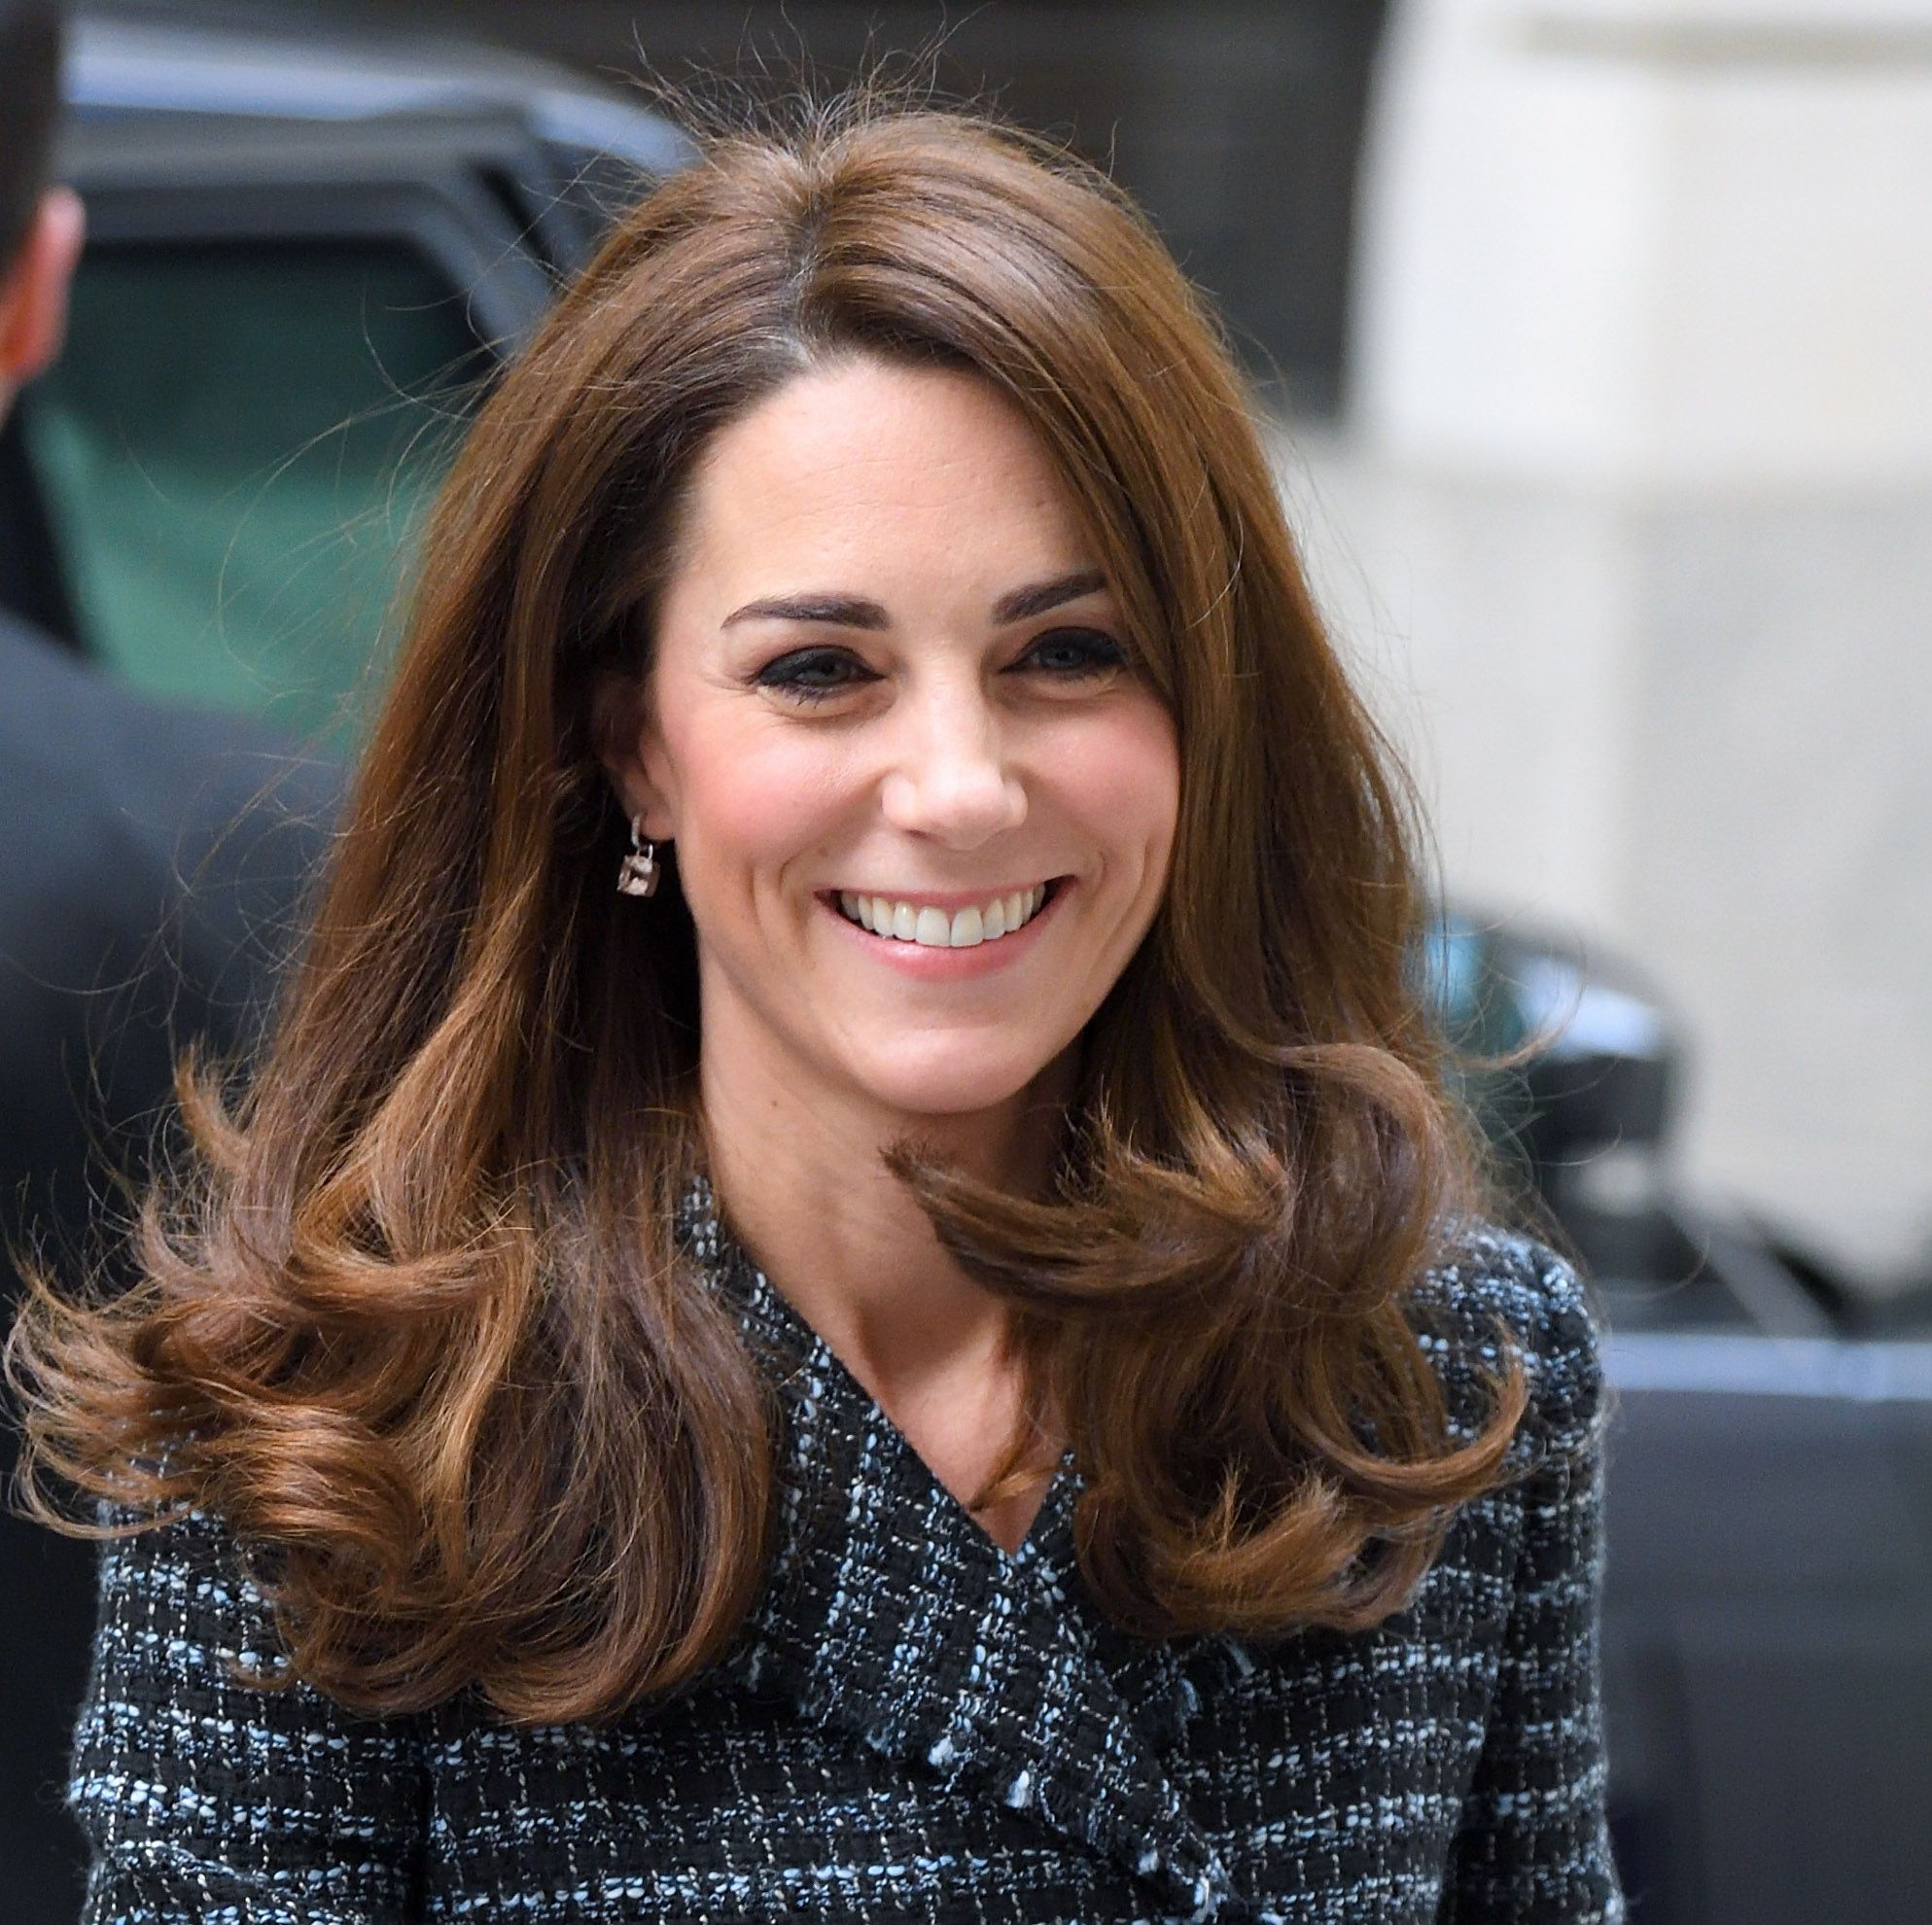 Kate Middleton opens up about being 'very naive' as a first-time parent